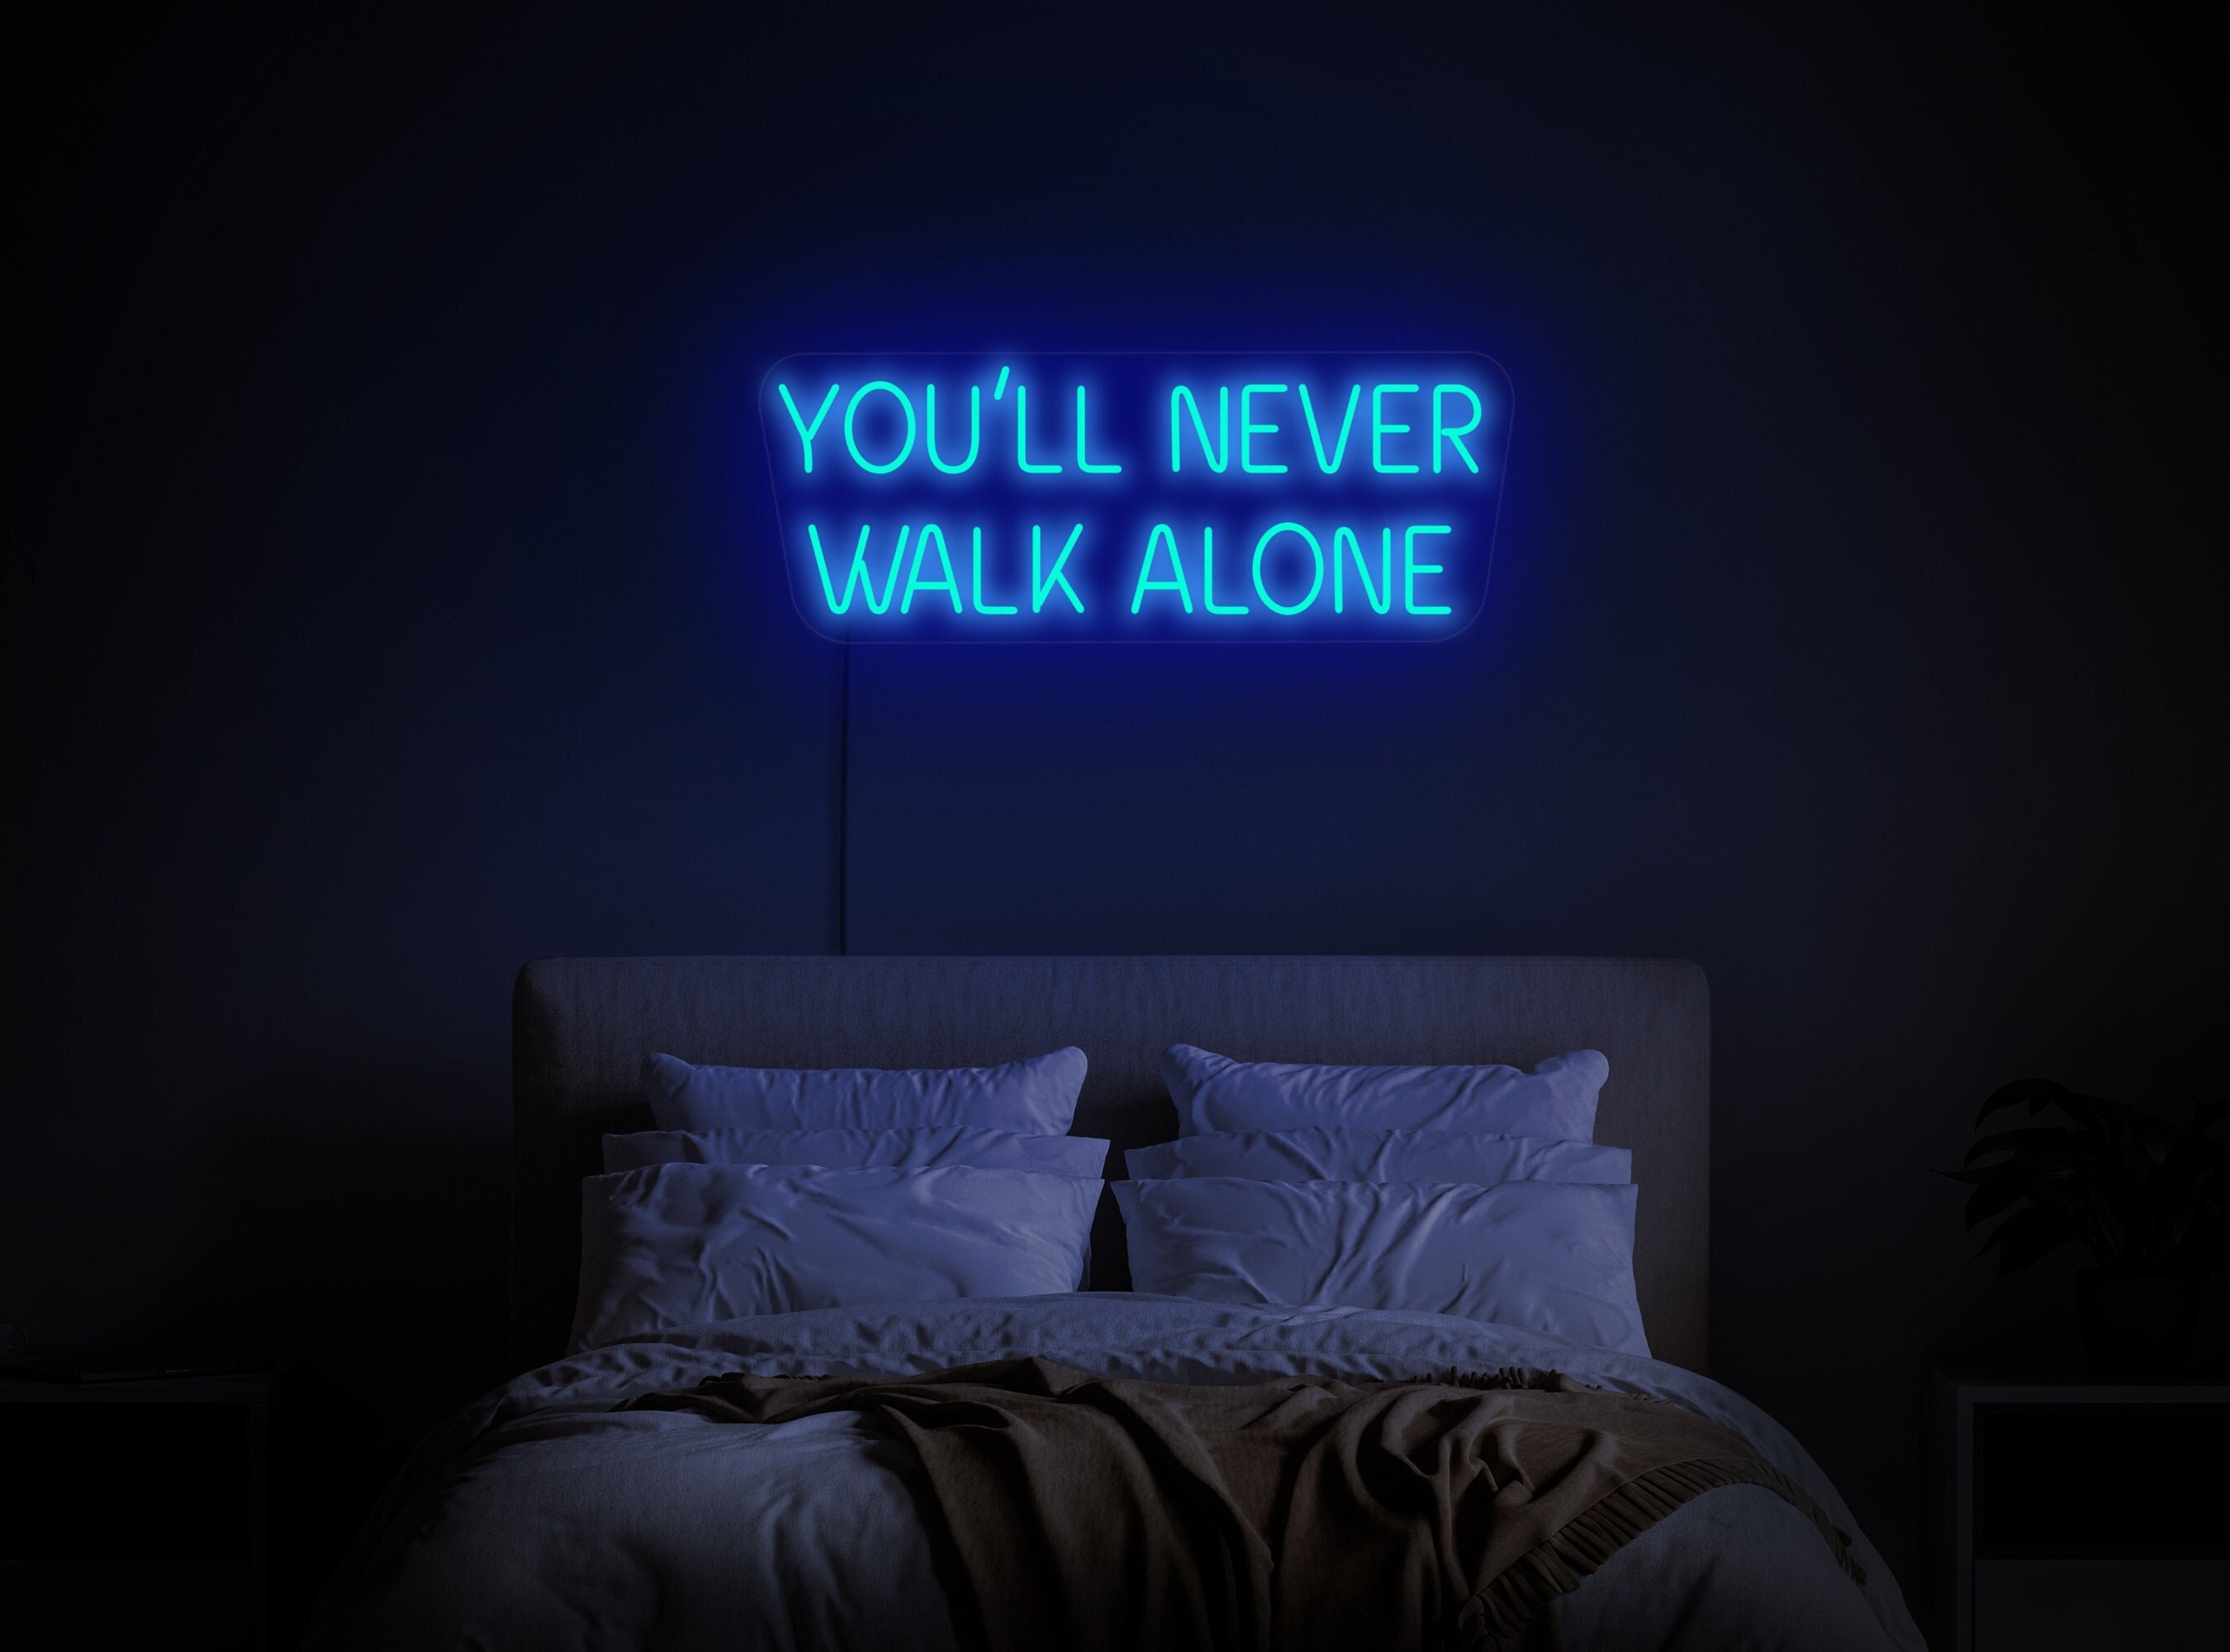 You´ll Never Walk Alone neon sign, Liverpool neon sign, YNWA neon sign, Liverpool led sign, Liverpool gift, YNWA sign, Liverpool wall decorthumbnail